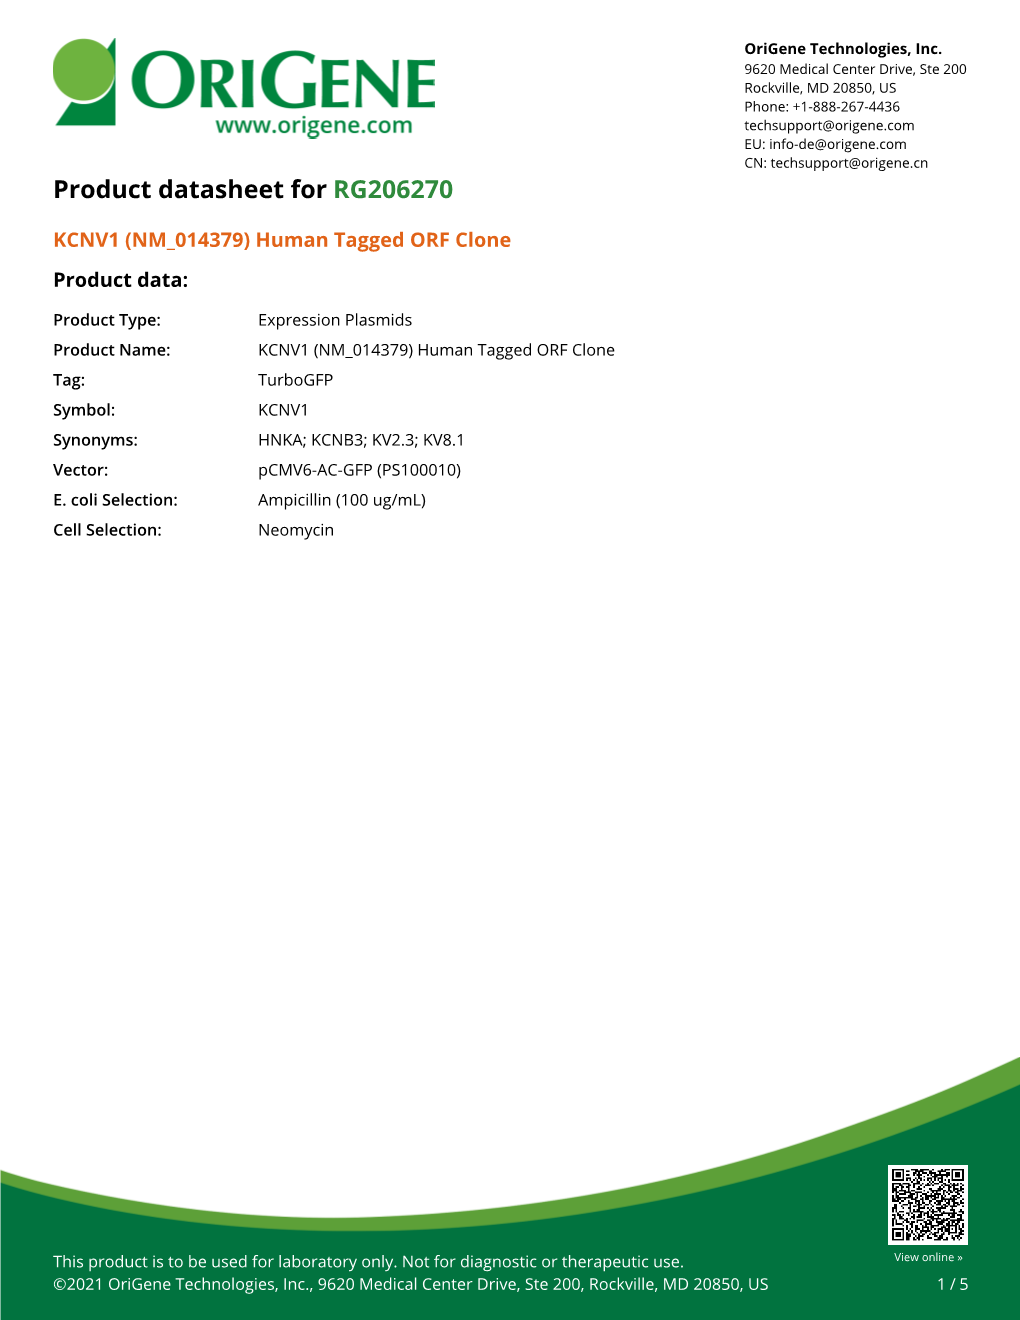 KCNV1 (NM 014379) Human Tagged ORF Clone Product Data